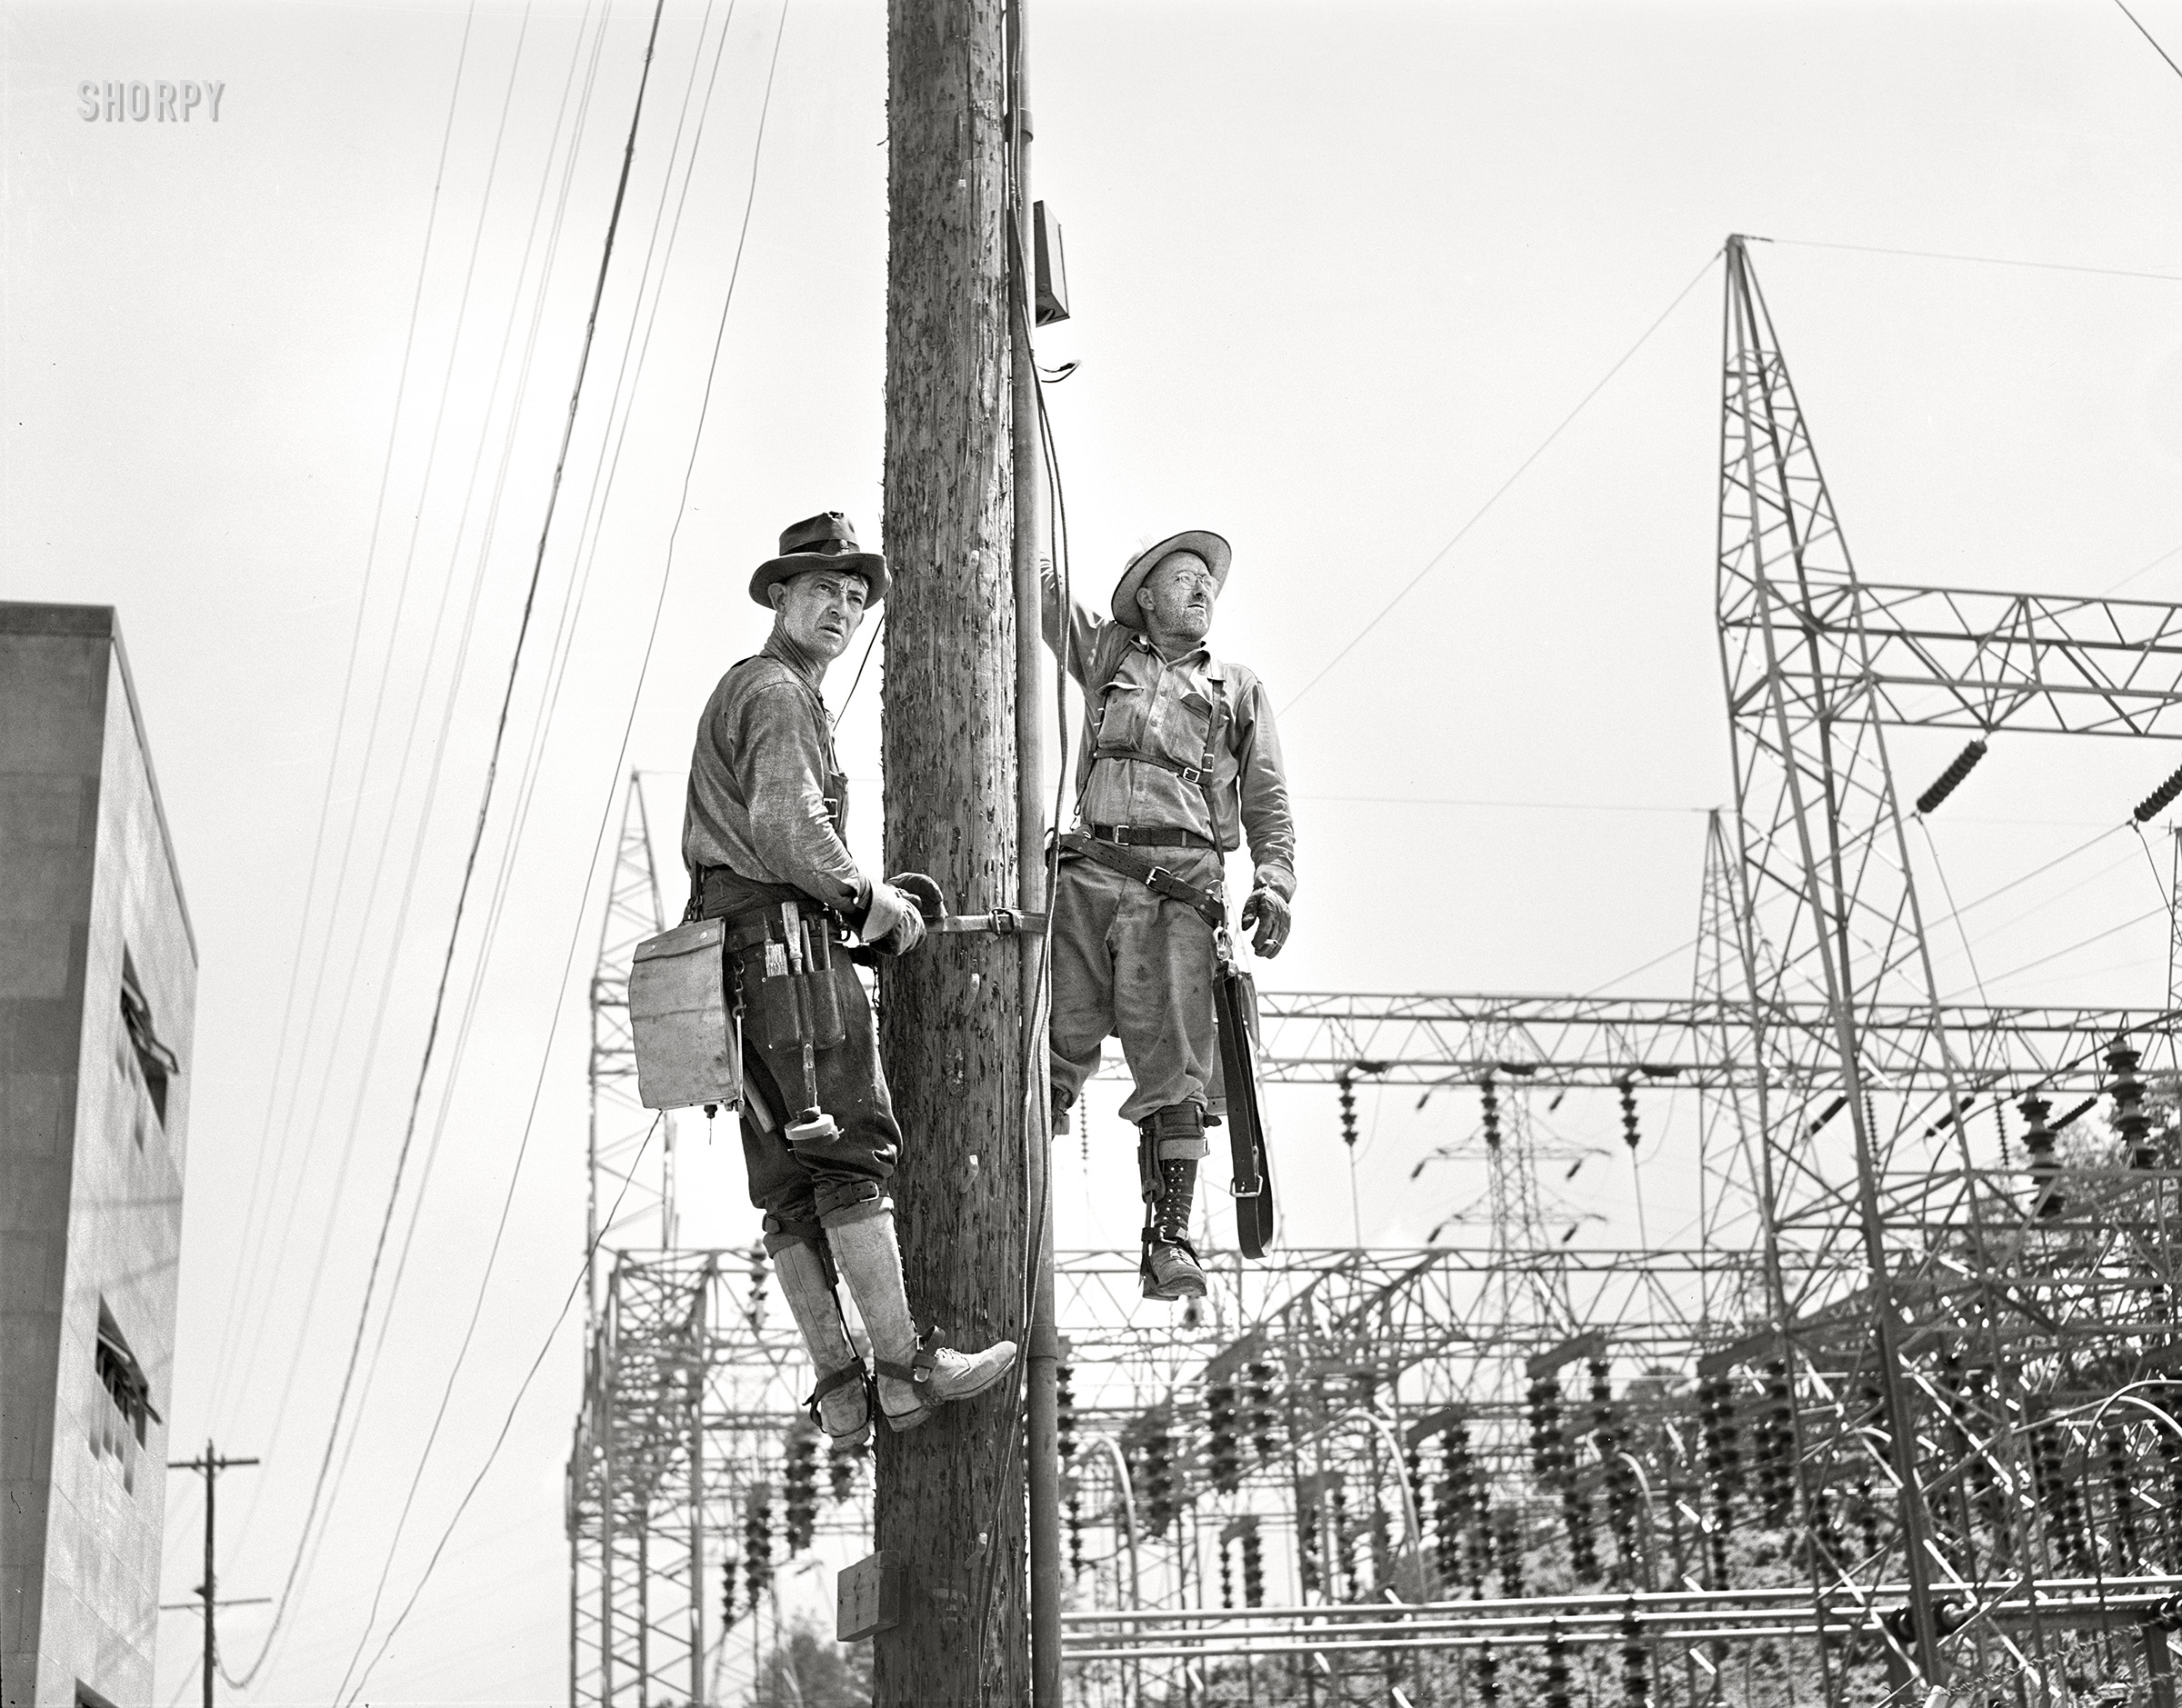 June 1942. "Watts Bar Dam, Tennessee. Tennessee Valley Authority linemen." Acetate negative by Arthur Rothstein for the U.S. Office of Coordinator of Information. View full size.